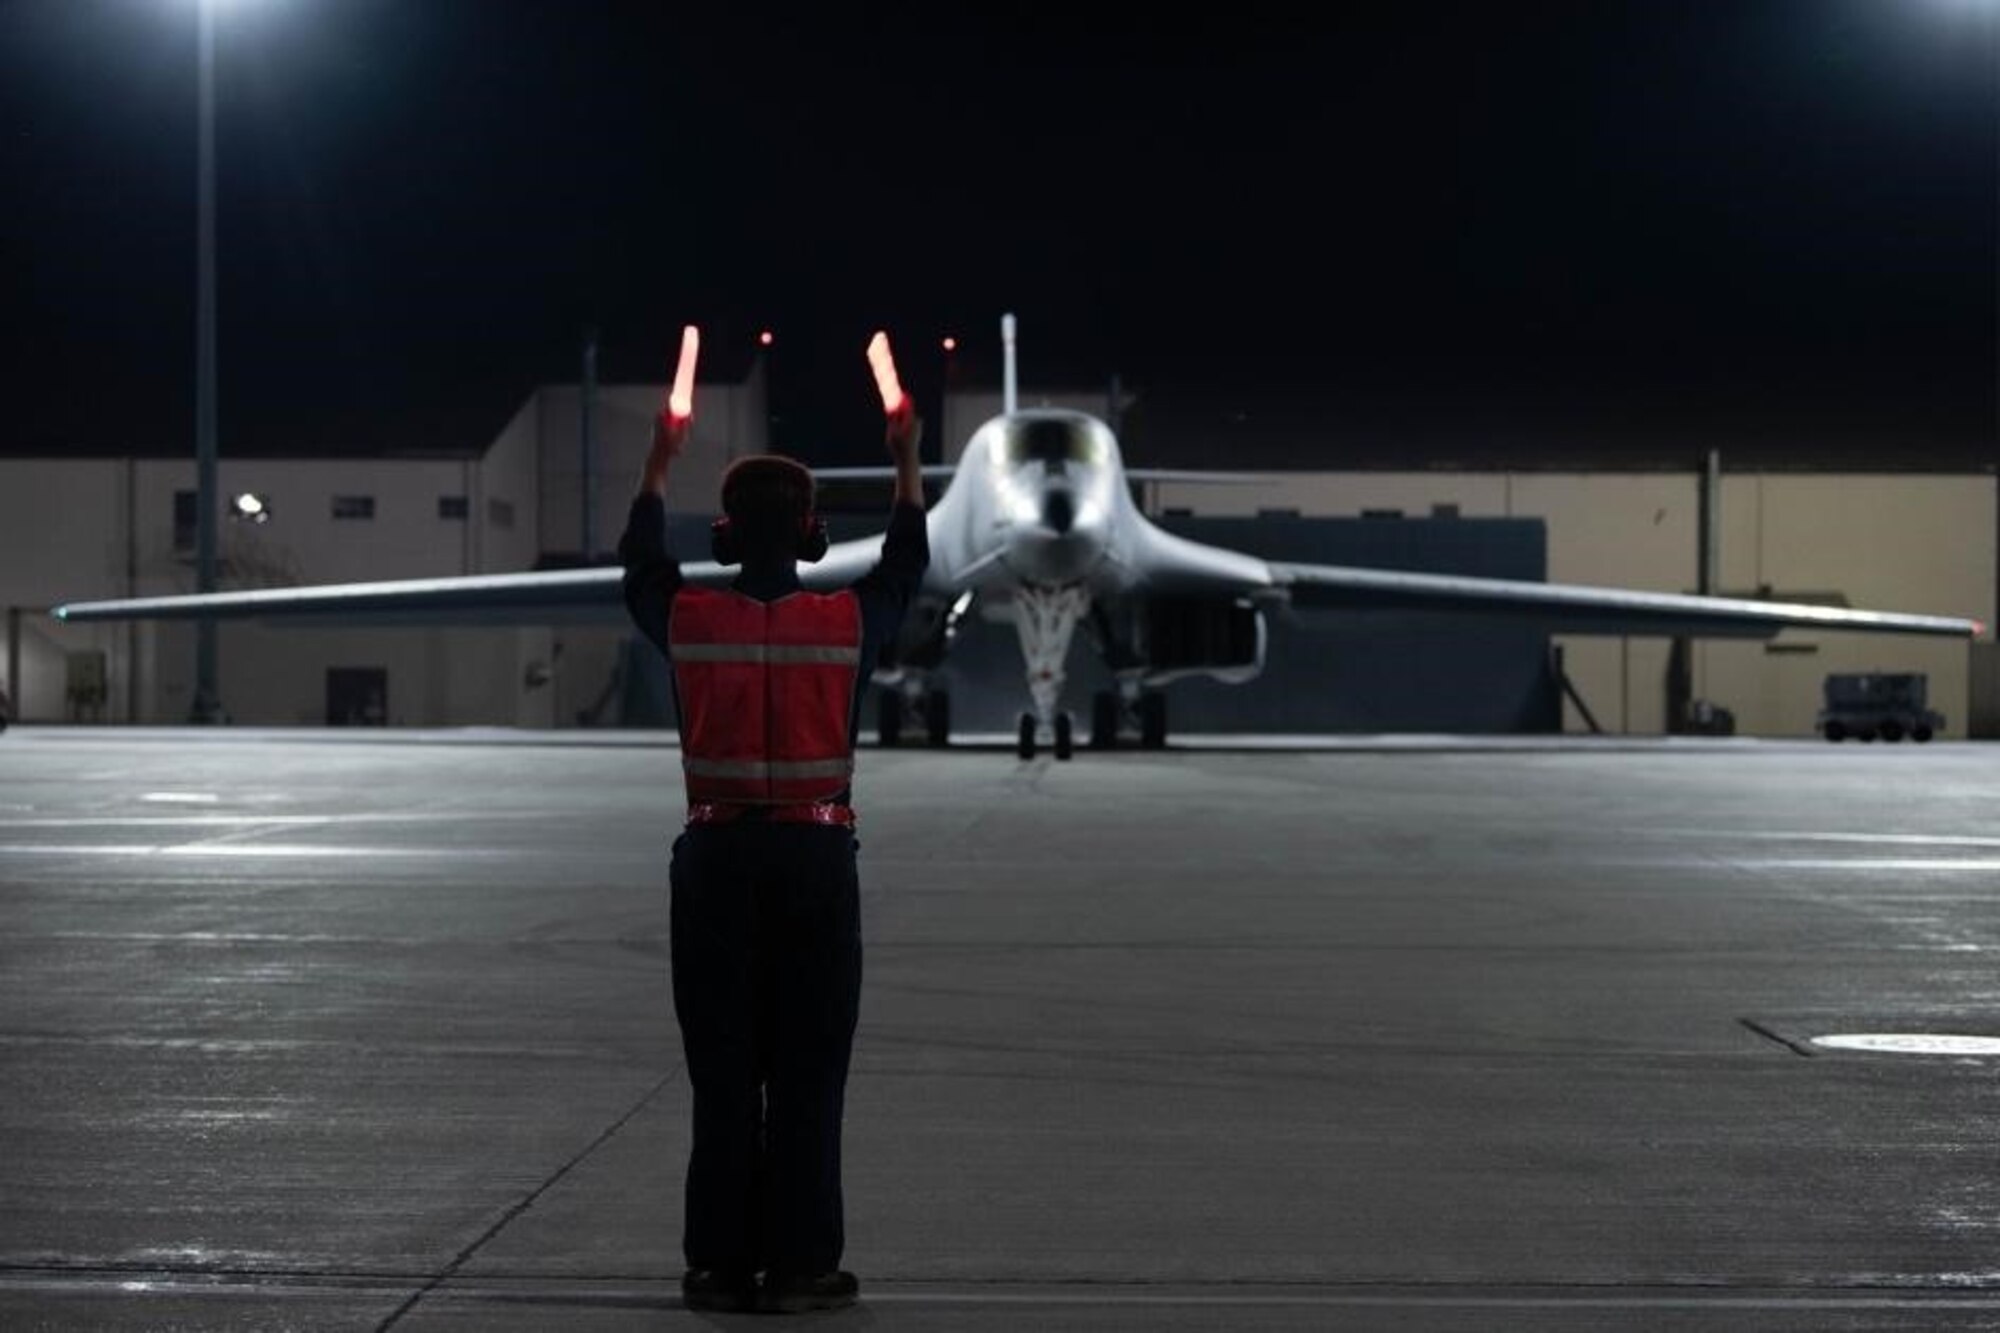 A crew chief assigned to the 28th Aircraft Maintenance Squadron marshals a B-1B Lancer from the tarmac to participate in a Bomber Task Force mission at Ellsworth Air Force Base, S.D., Sept. 7, 2021.